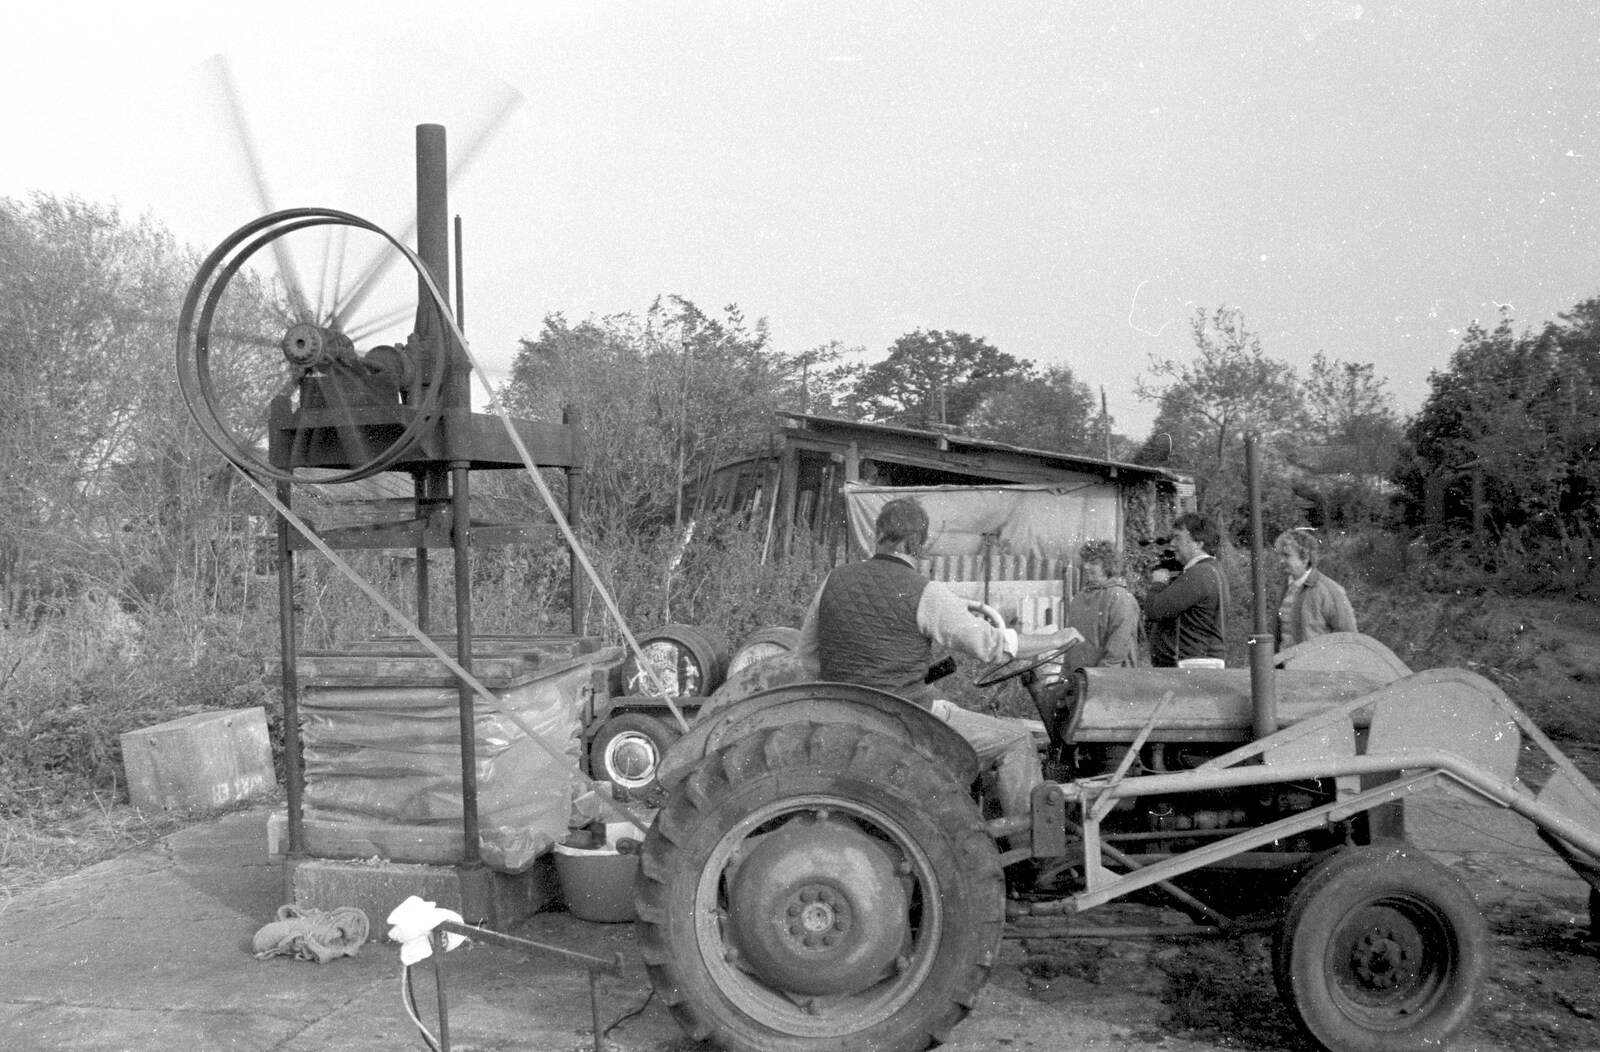 Geoff drives in reverse as the pressing is done from Cider Making in Black and White, Stuston, Suffolk - 11th October 1992